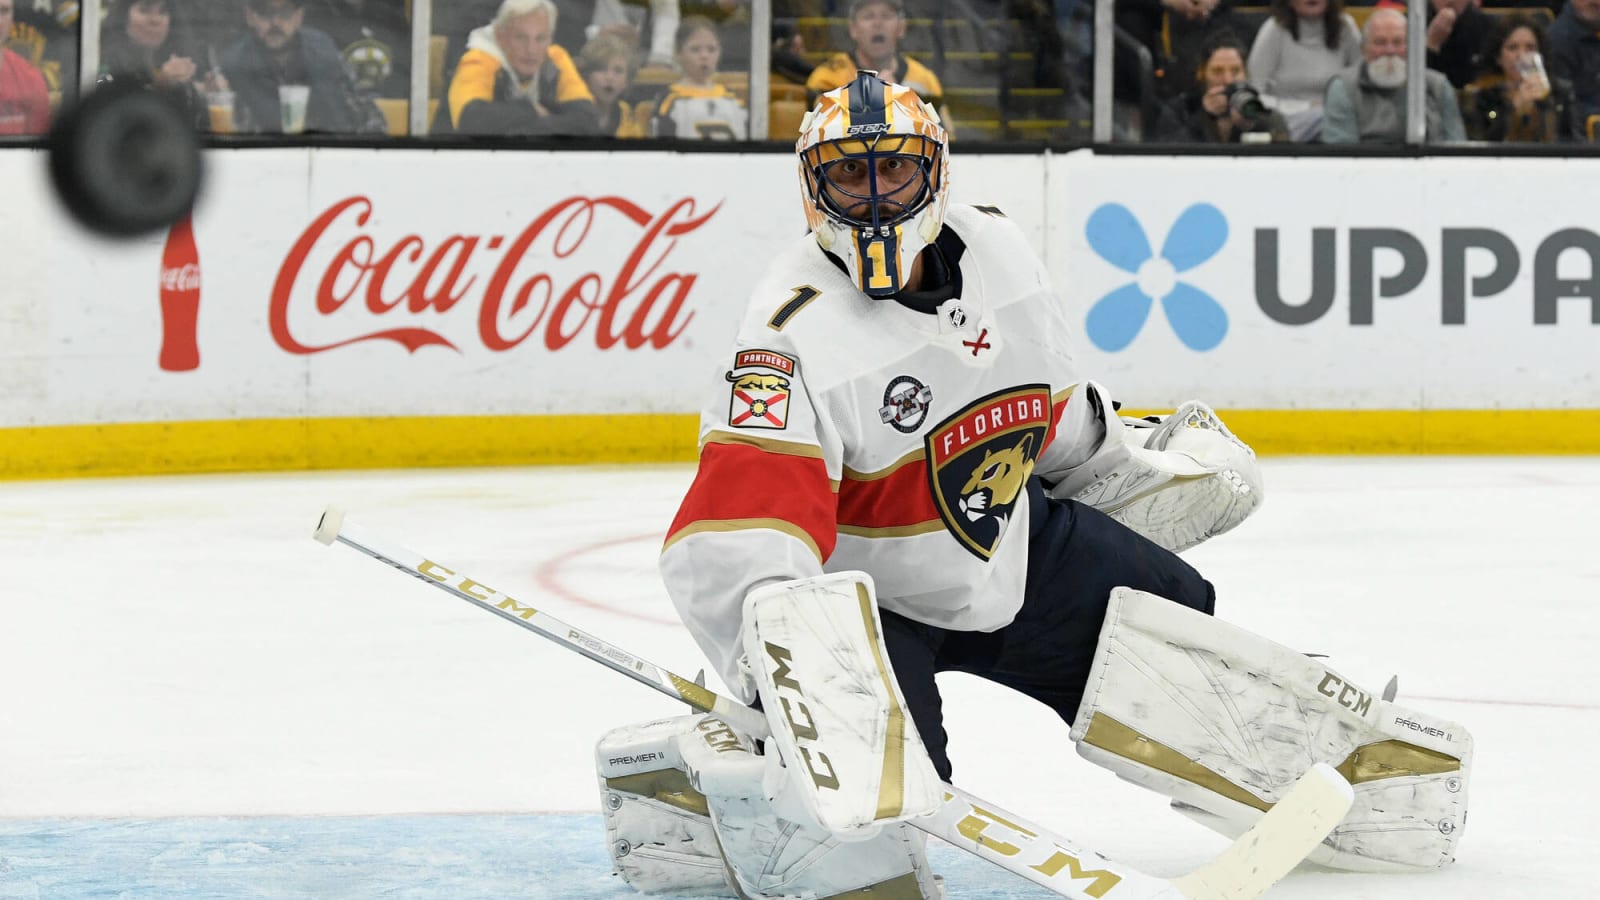 Report: Canucks rejected opportunity to reacquire Roberto Luongo for LTIR purposes from Panthers before he retired in 2019